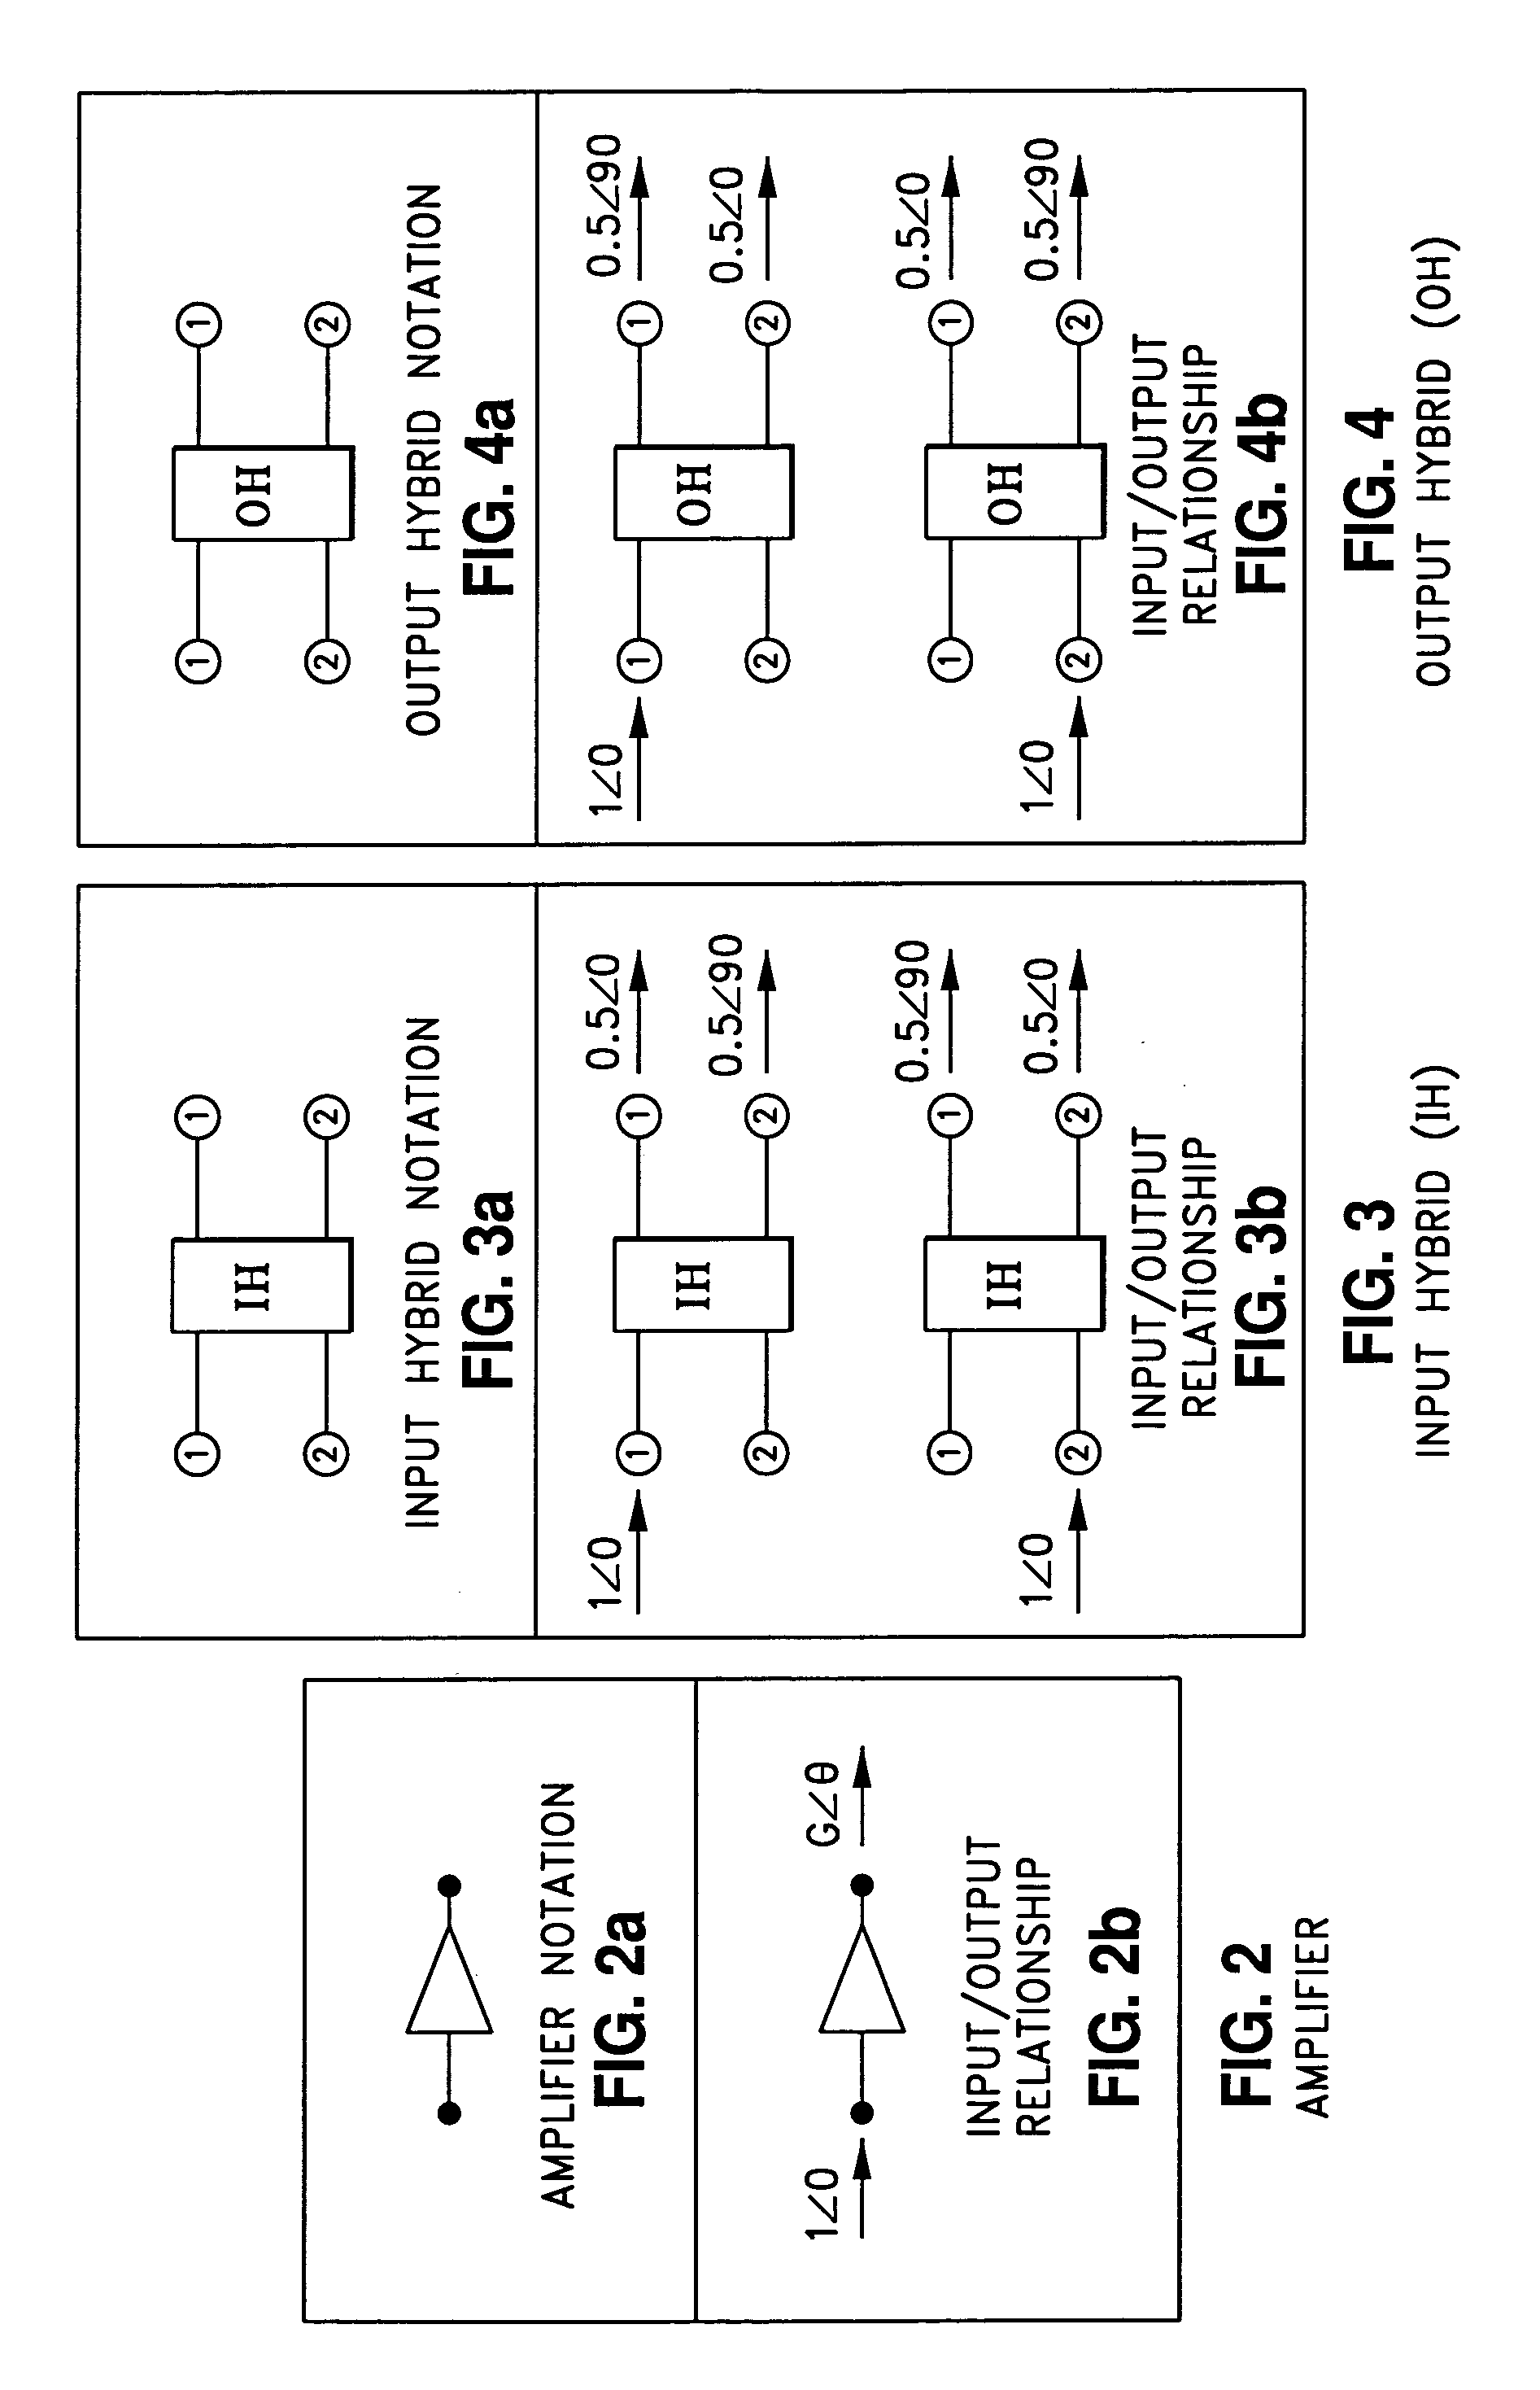 Adjustable multiport power/phase method and system with minimum phase error